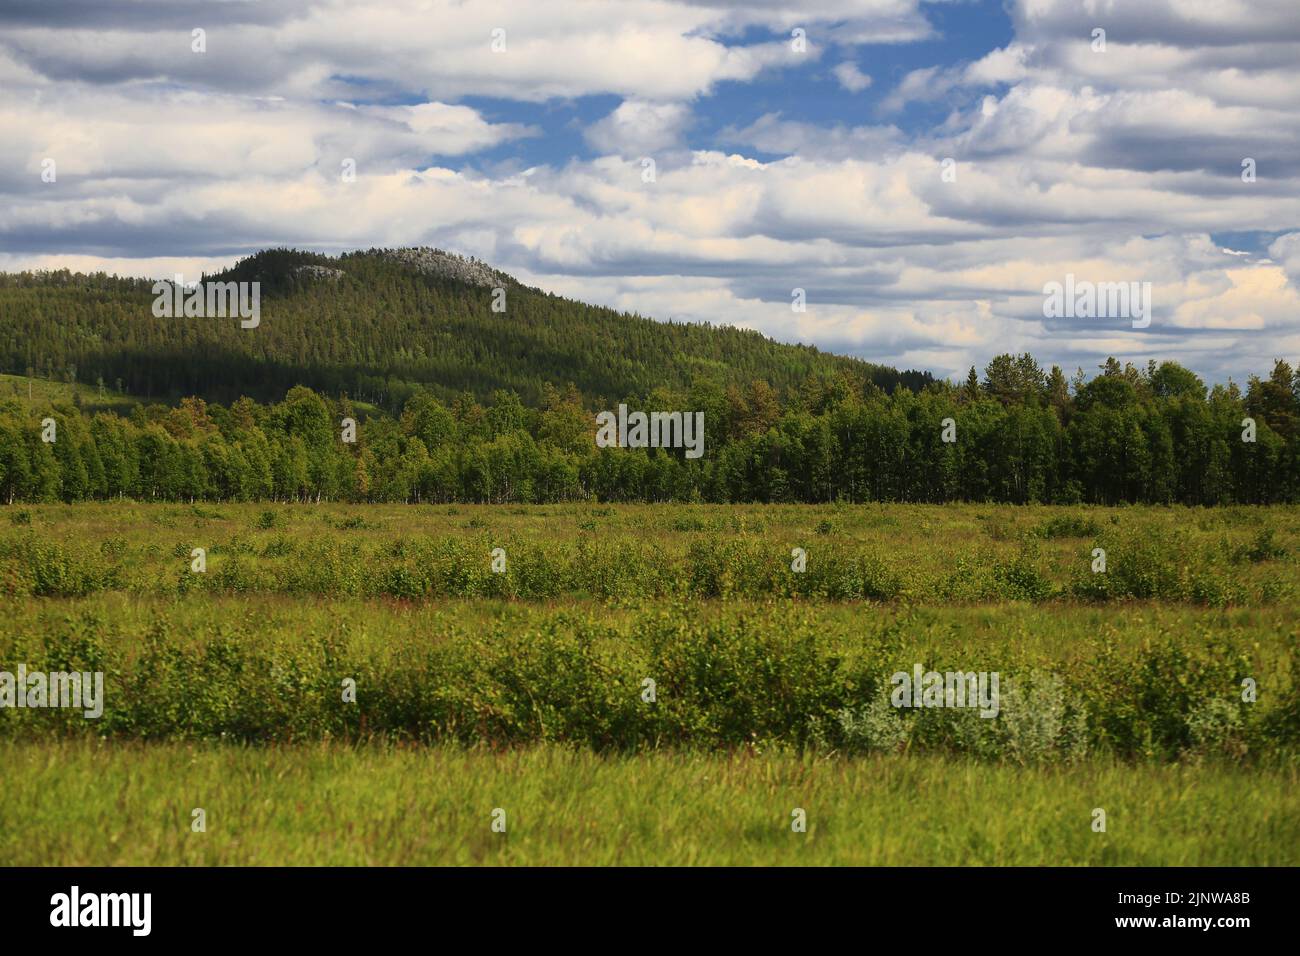 Meadows, forests and the small mountain Vithatten in northern Sweden. Stock Photo